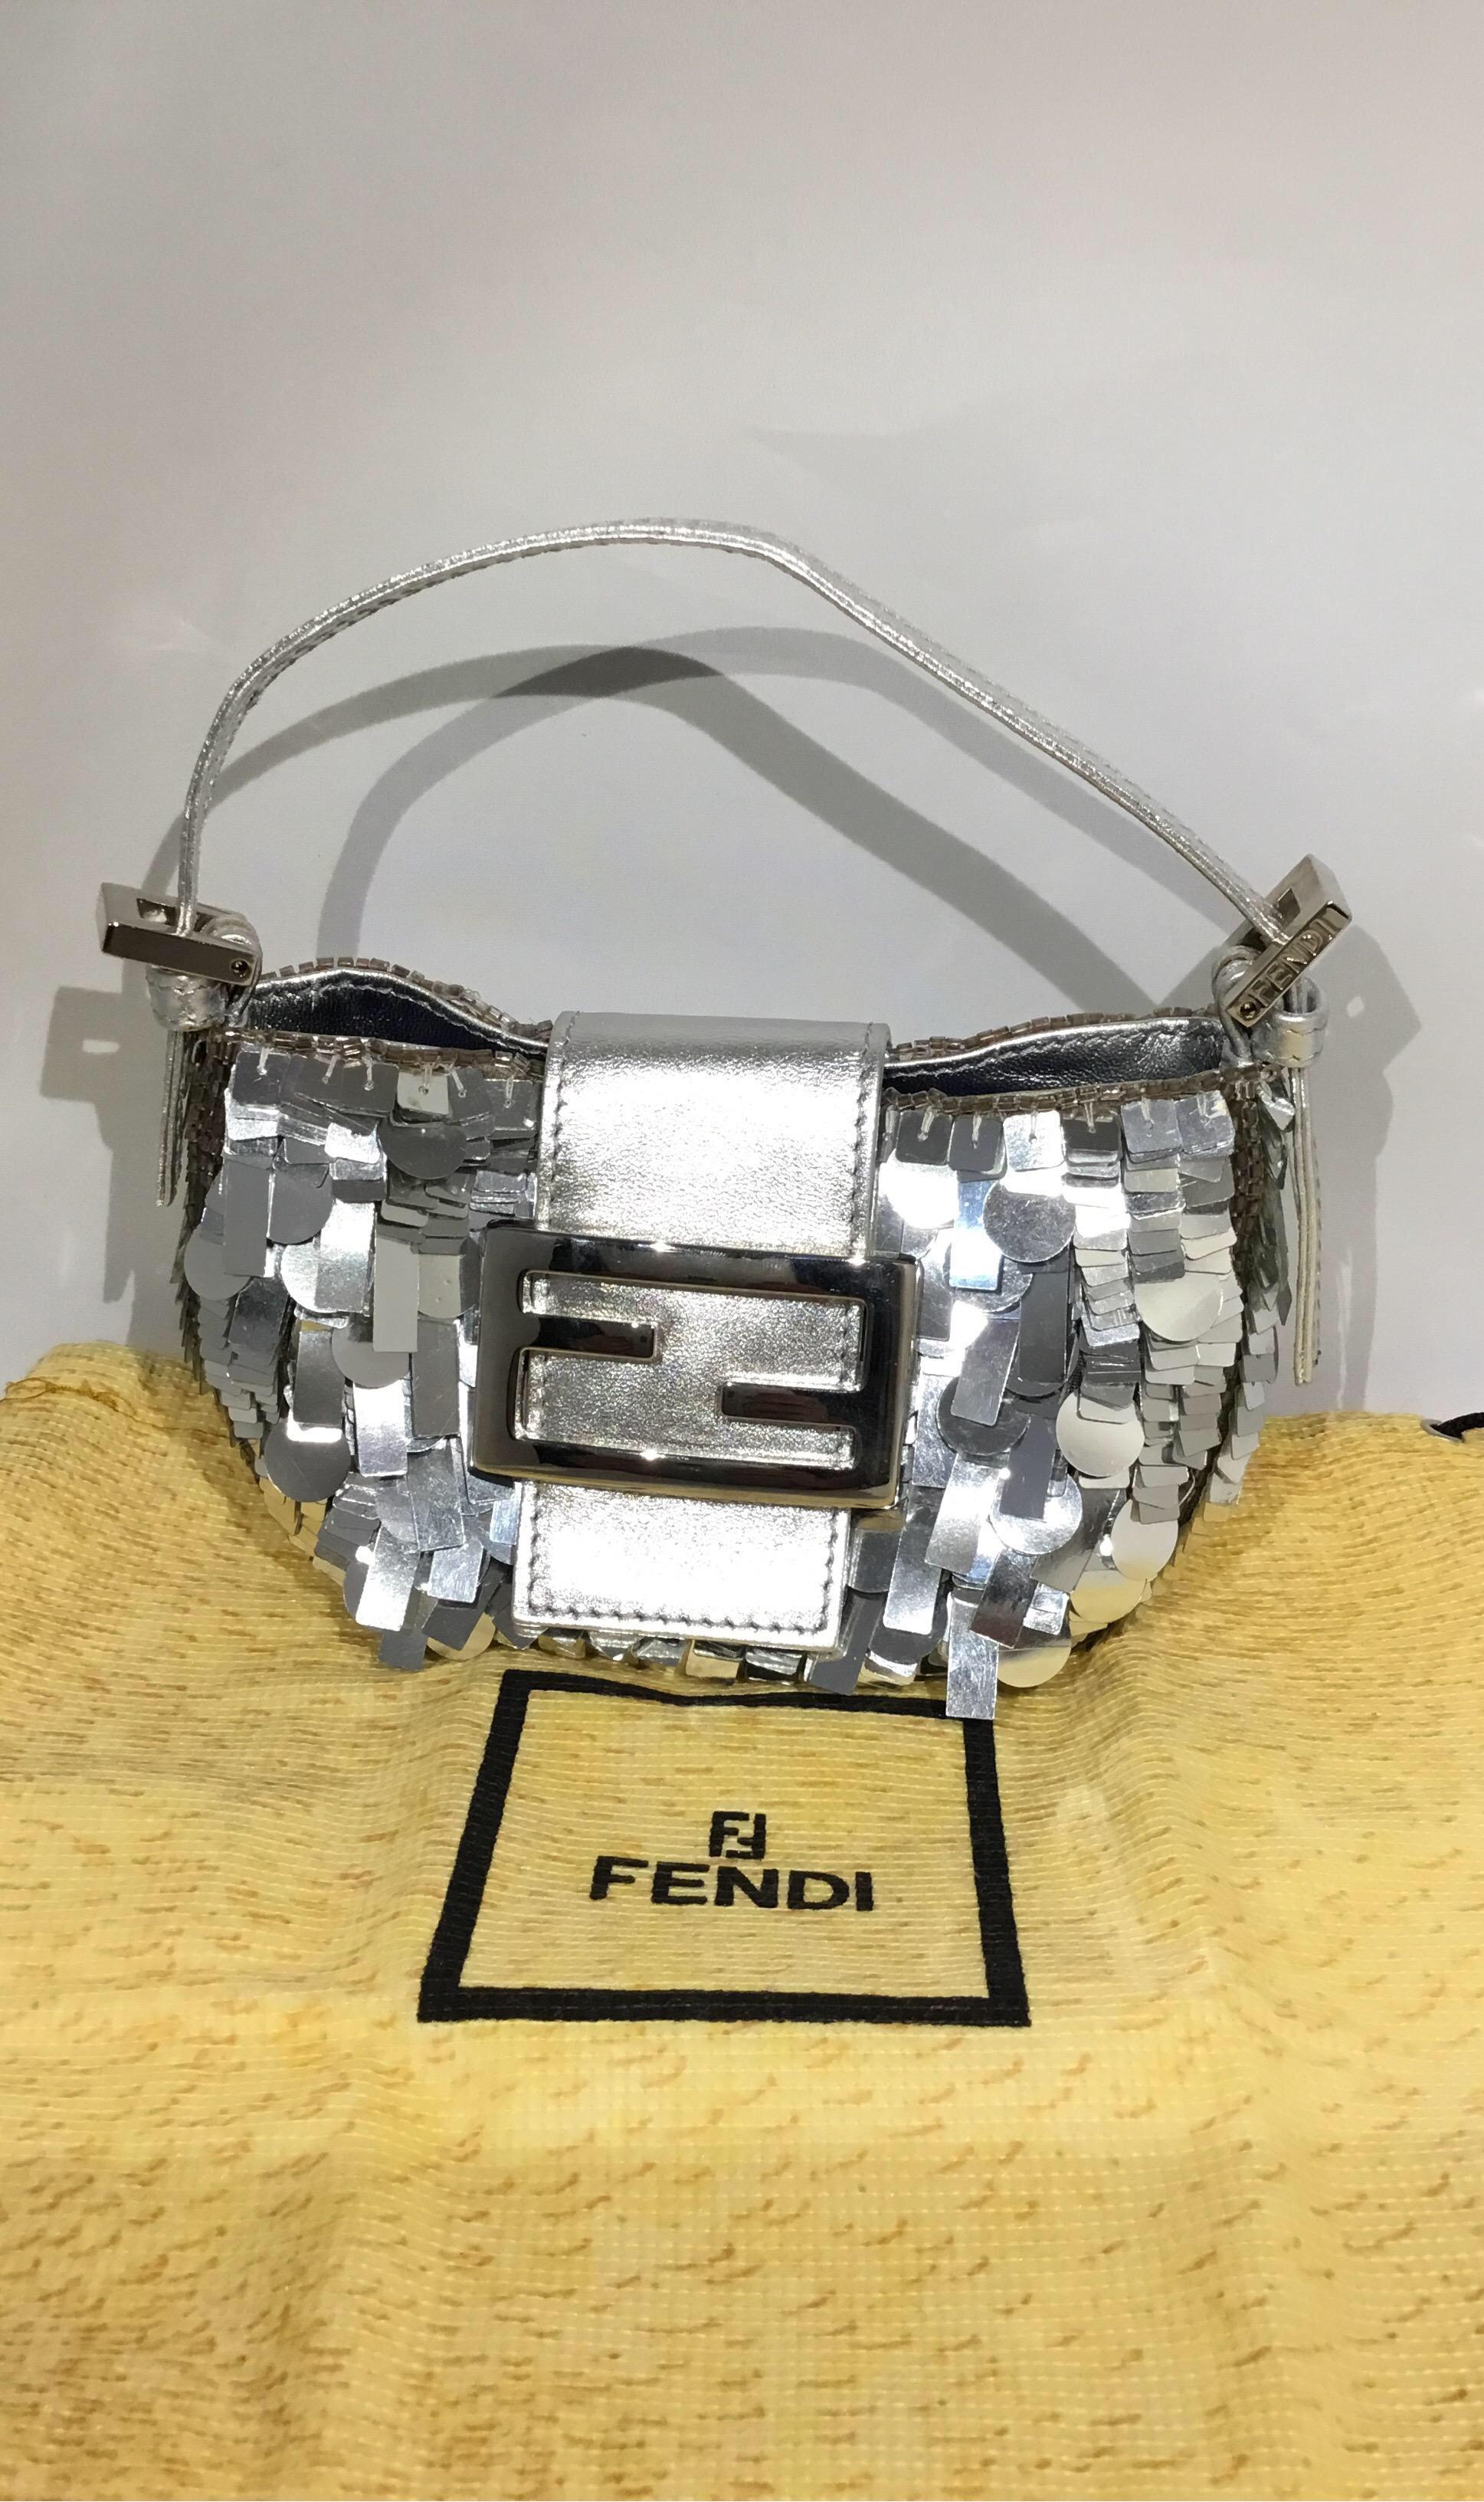 Fendi Mini baguette featured in silver with a fully sequined detail and bead trim along the opening and frame of the Purse. There is a flat leather top handle attached with silvertone hardware and a signature Fendi flap-snap closure. Bag has a